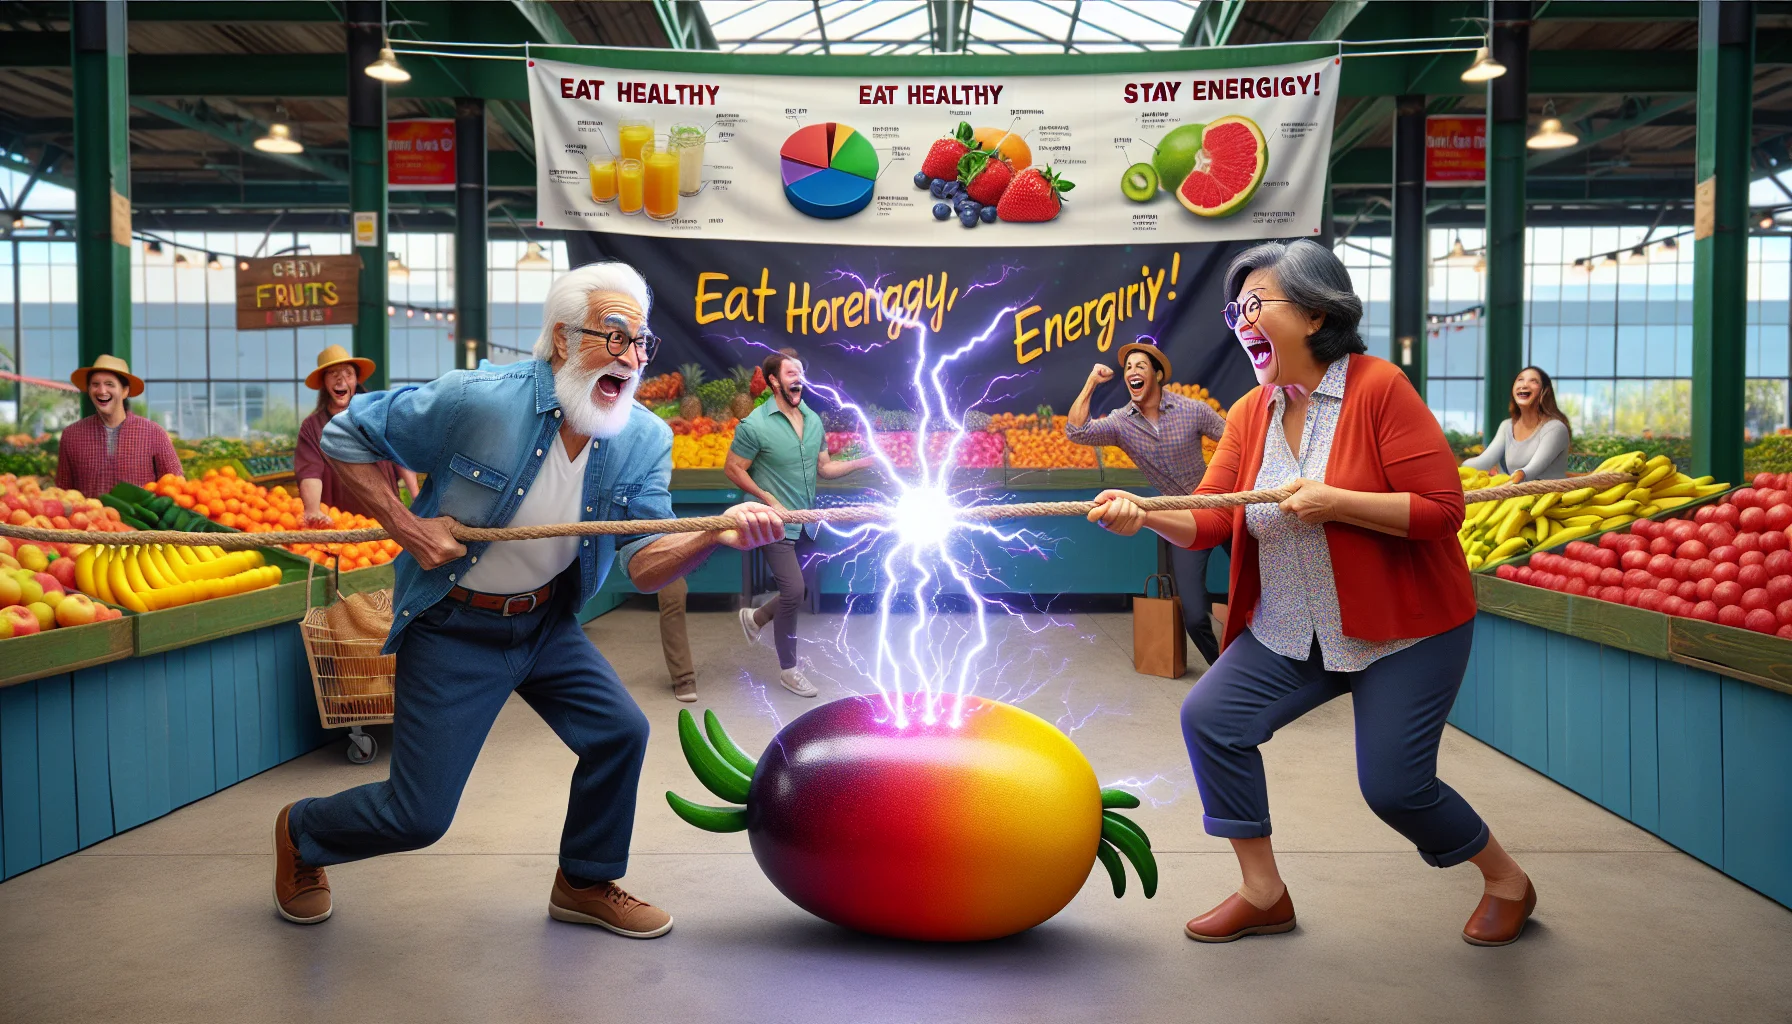 Imagine a humorous realistic scenario in a bustling farmers' market. Two elderly individuals of different descents, one South Asian man and one Hispanic woman, both active and lively, are engaging in a playful tug-of-war over a humongous, brightly-coloured energy fruit. Their laughter is infectious, drawing the attention of other shoppers. Behind them, a colourful diagram chart showing the benefits of fruits and a banner that reads 'Eat Healthy, Stay Energetic!' add to the amusing context. The energy fruit is sparking and bursting with light, like a battery, highlighting the theme of energy-boosting properties.